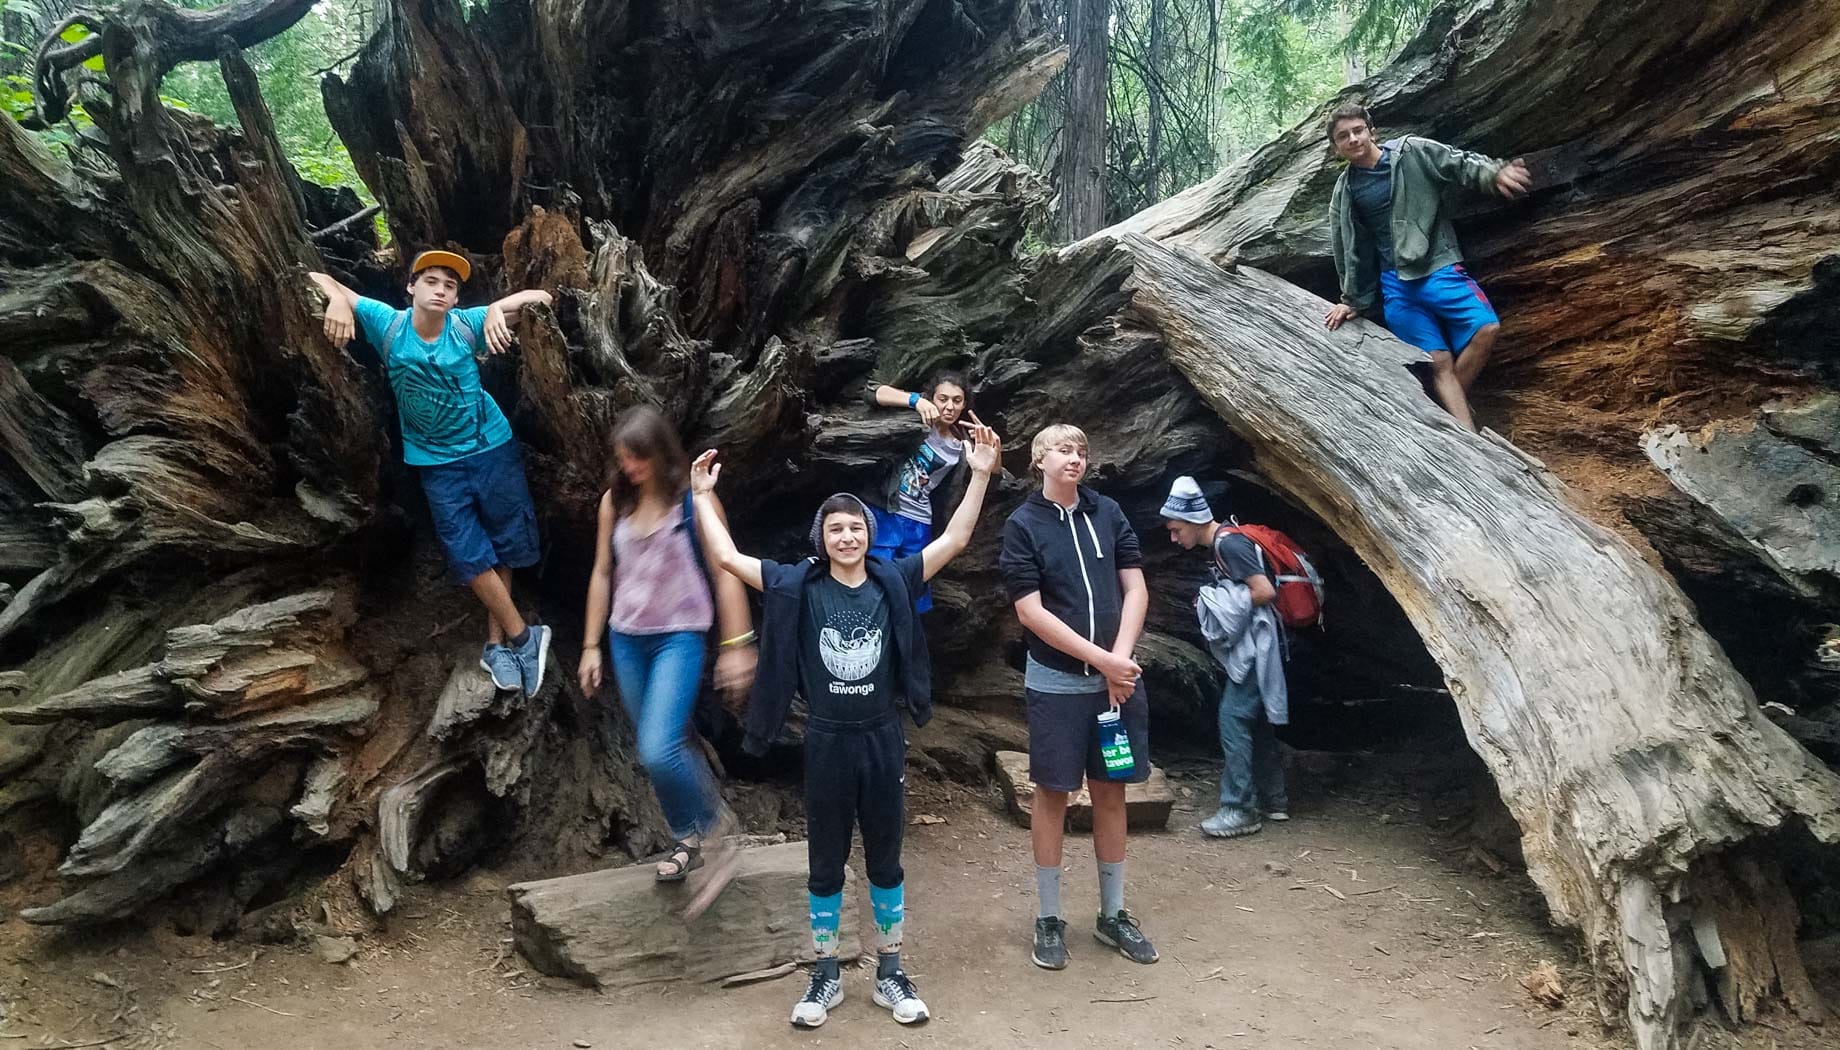 Redwoods site-seeing on the Magical Mystery quest